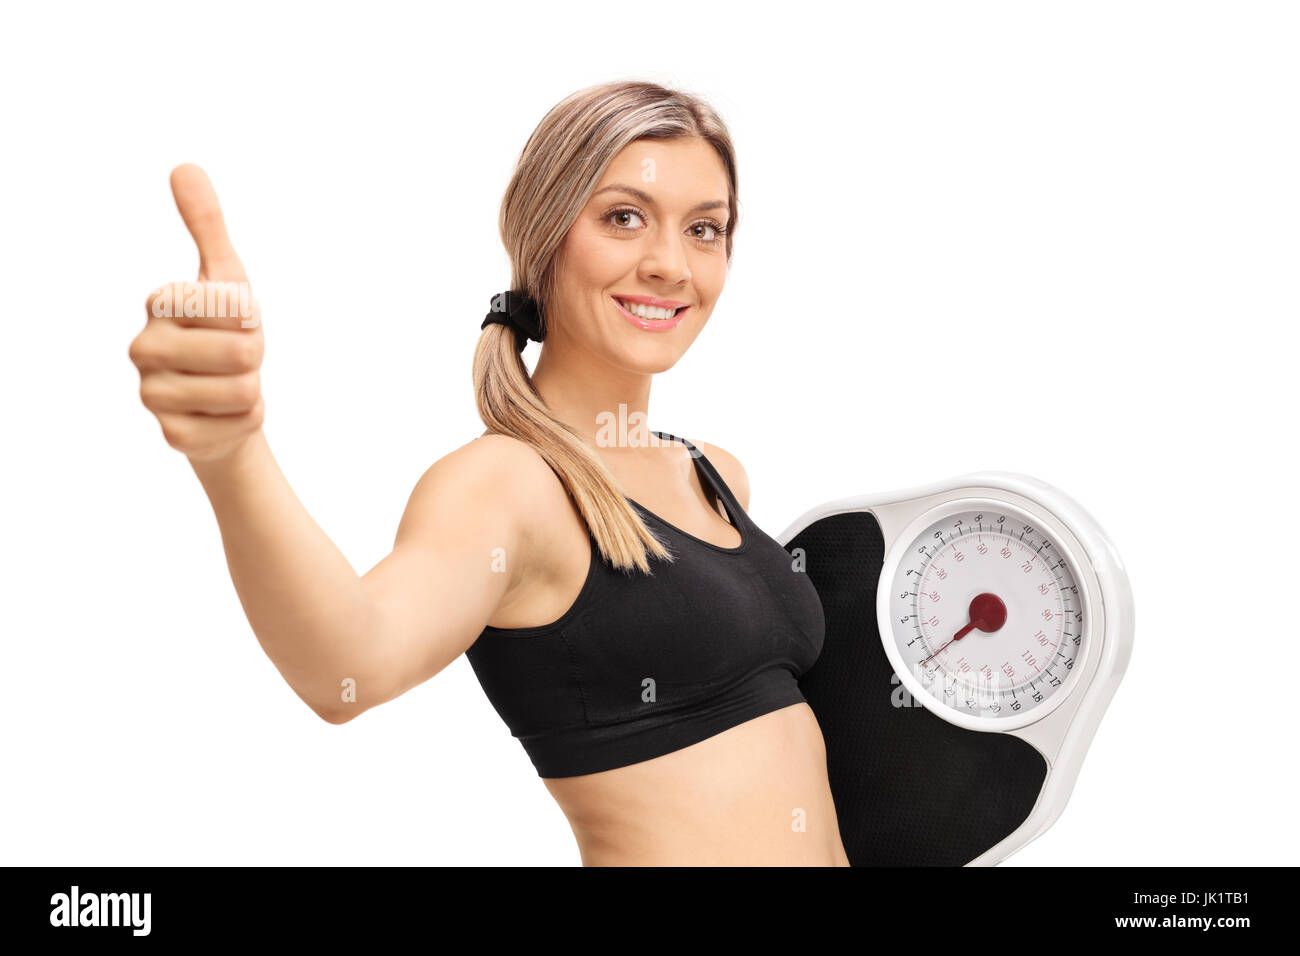 Young woman with a weight scale making a thumb up gesture isolated on white background Stock Photo